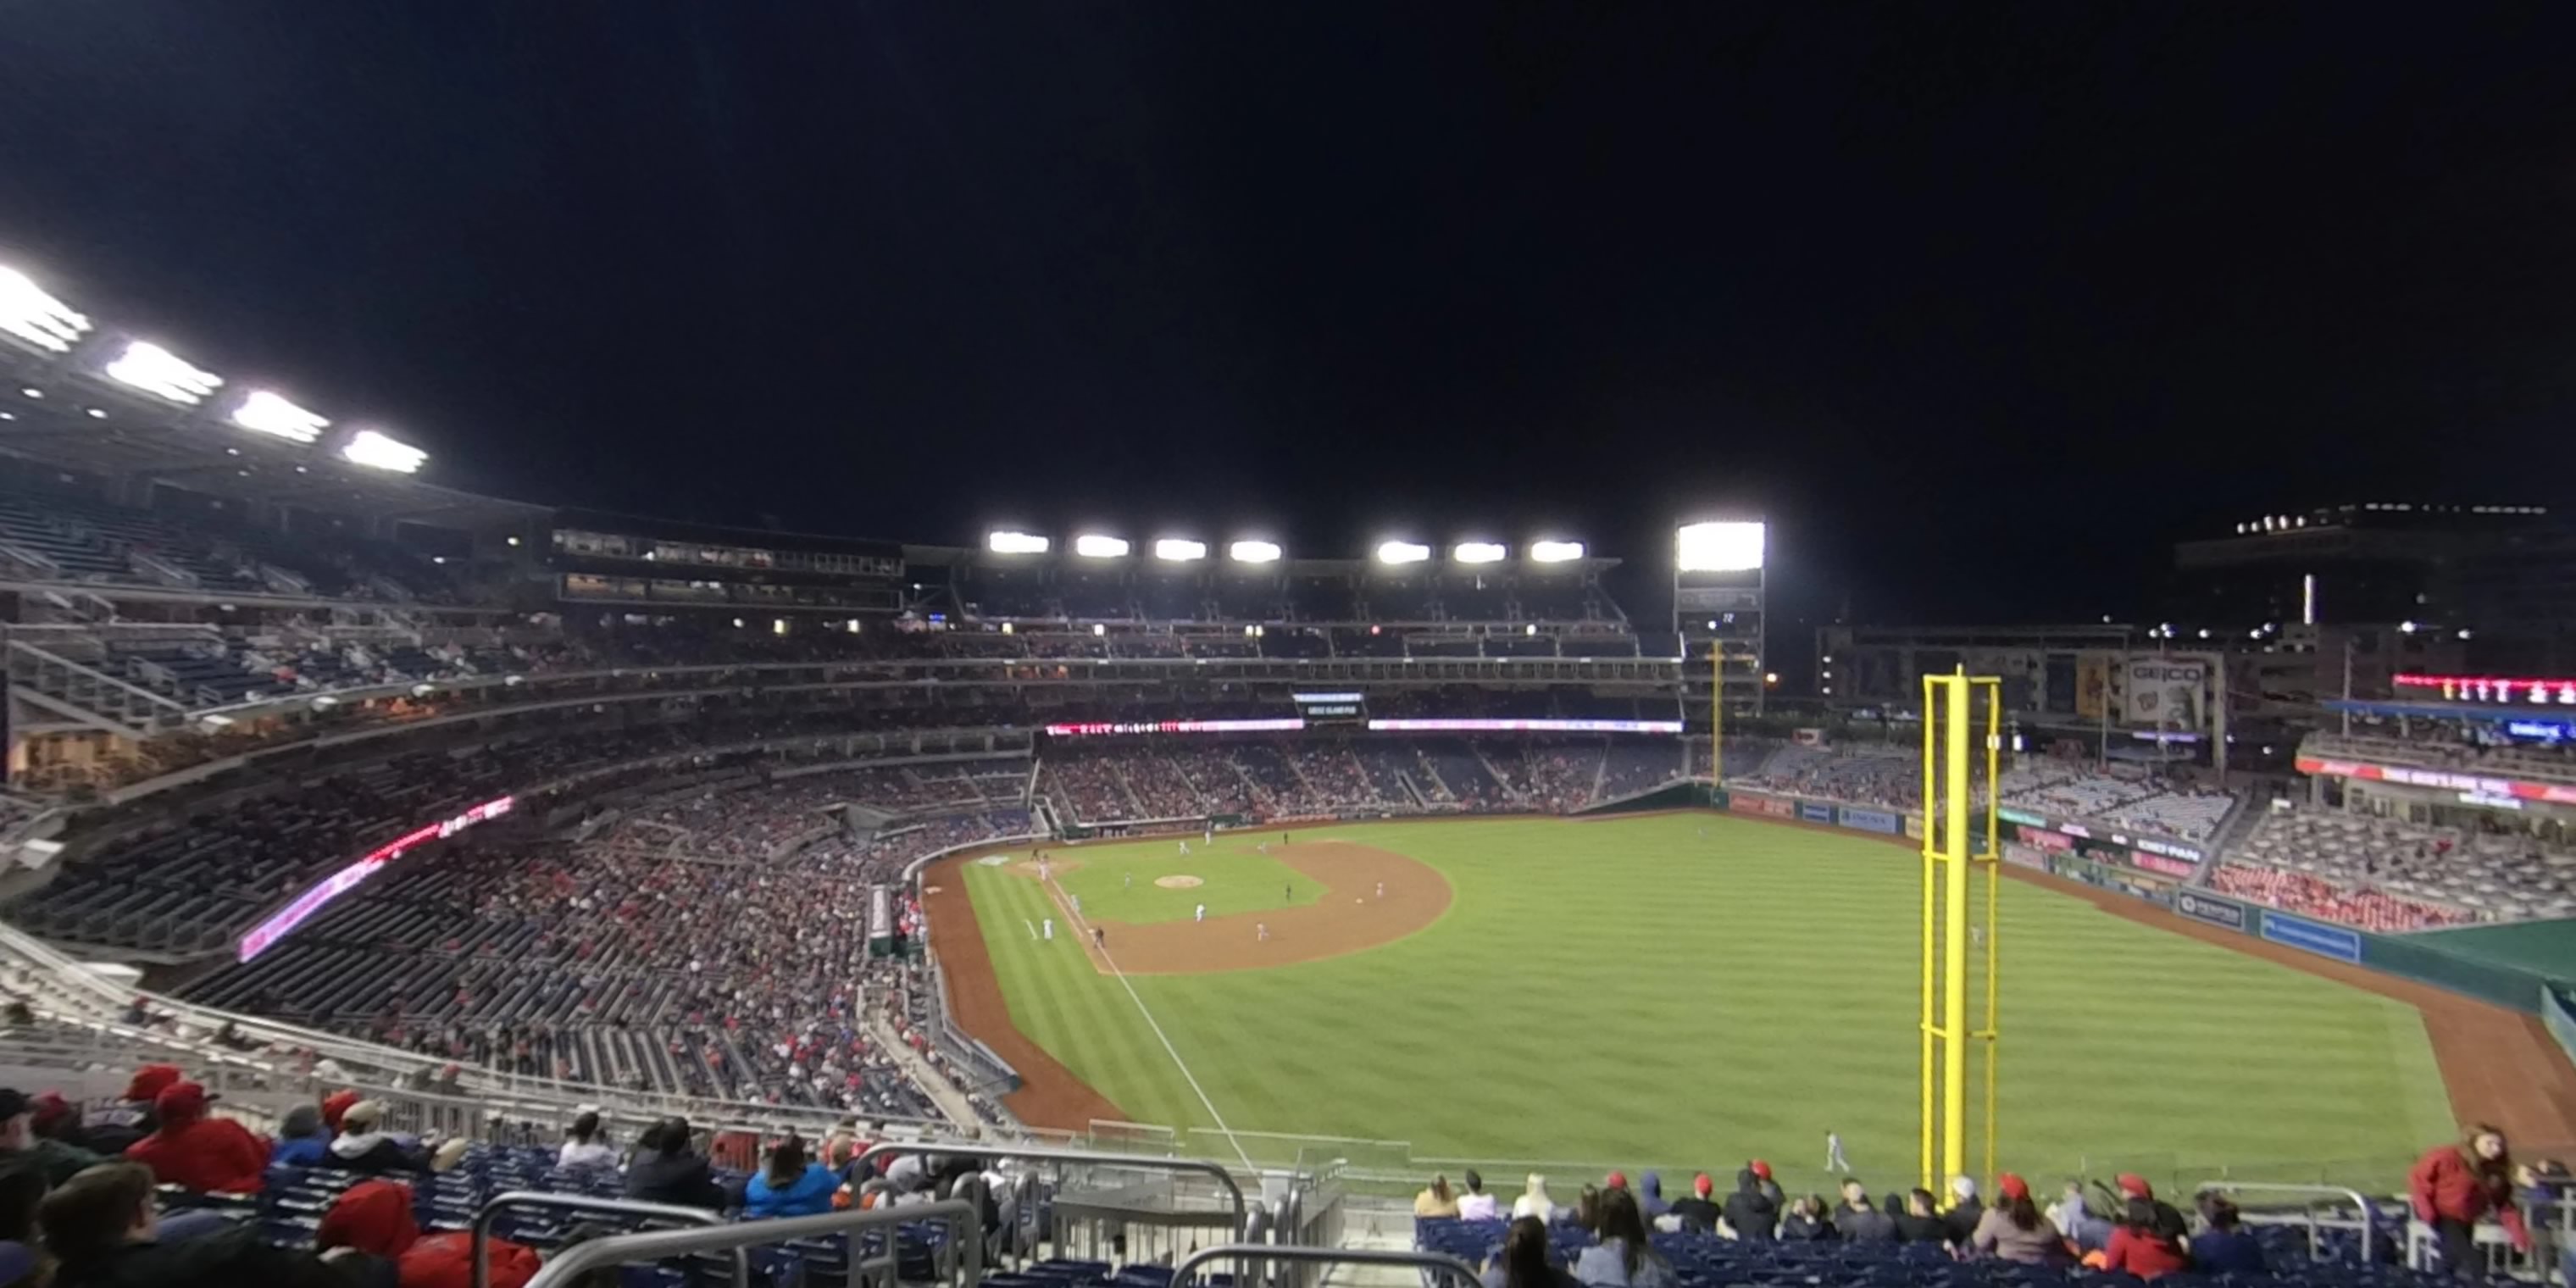 section 230 panoramic seat view  for baseball - nationals park